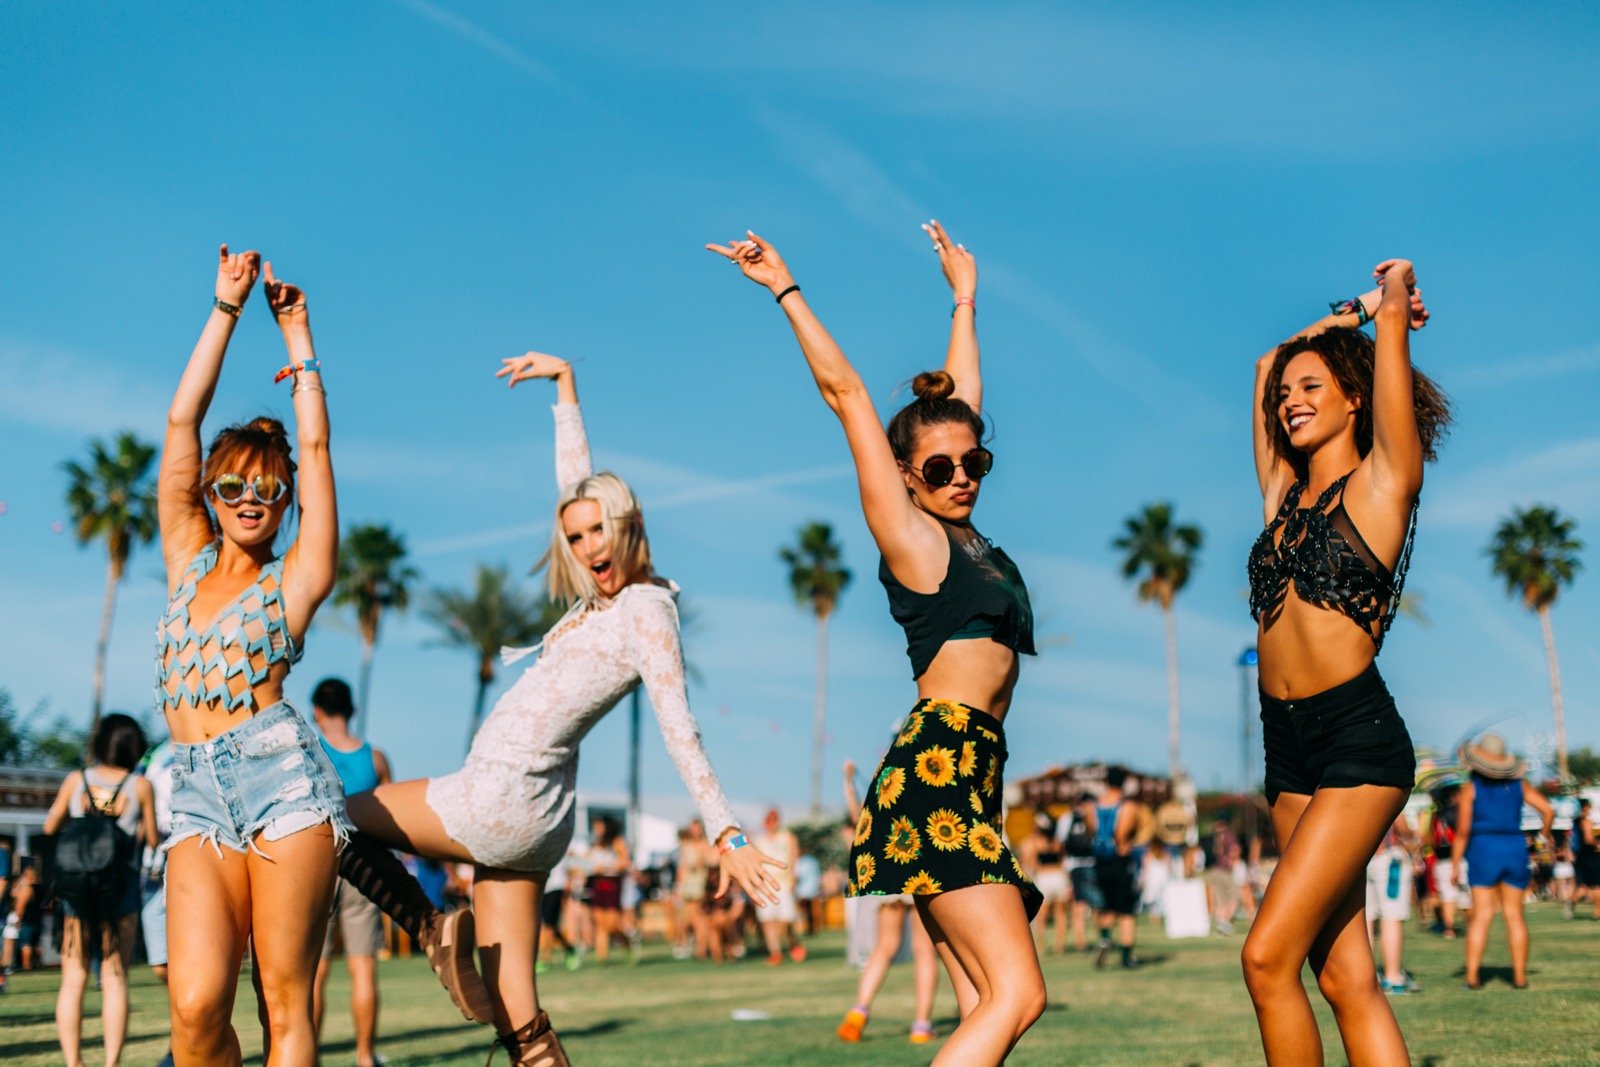 Essential Personal Care Products to Pack for Coachella